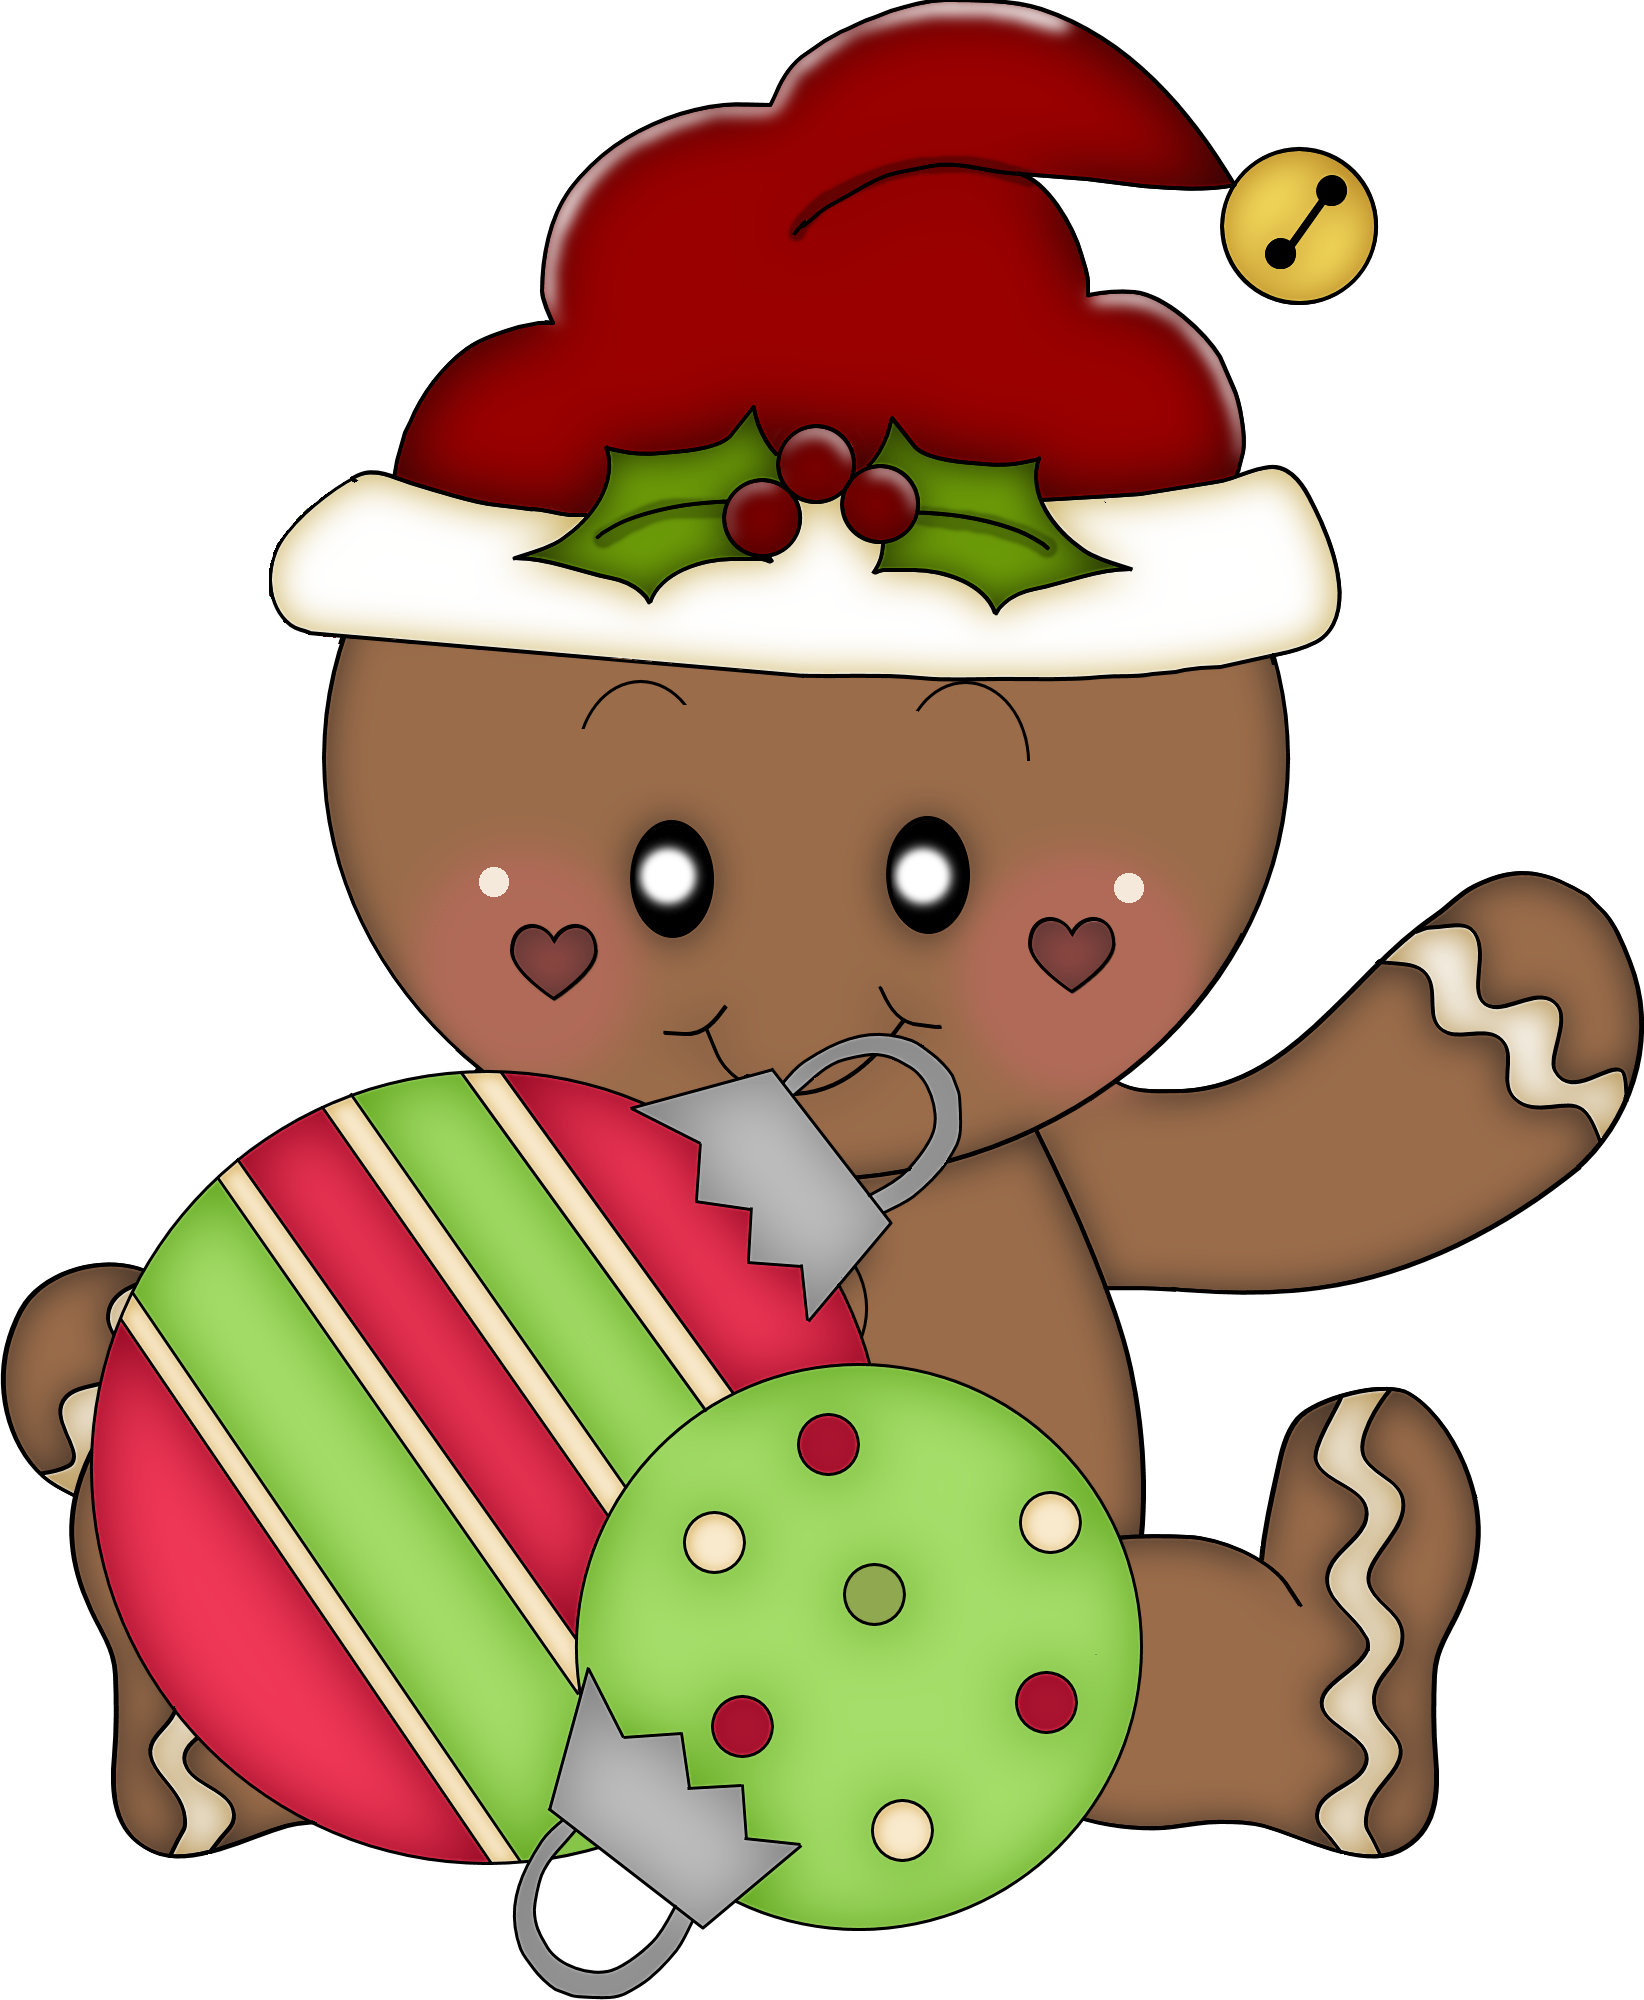 Ginger bread printable packet. Gingerbread clipart character